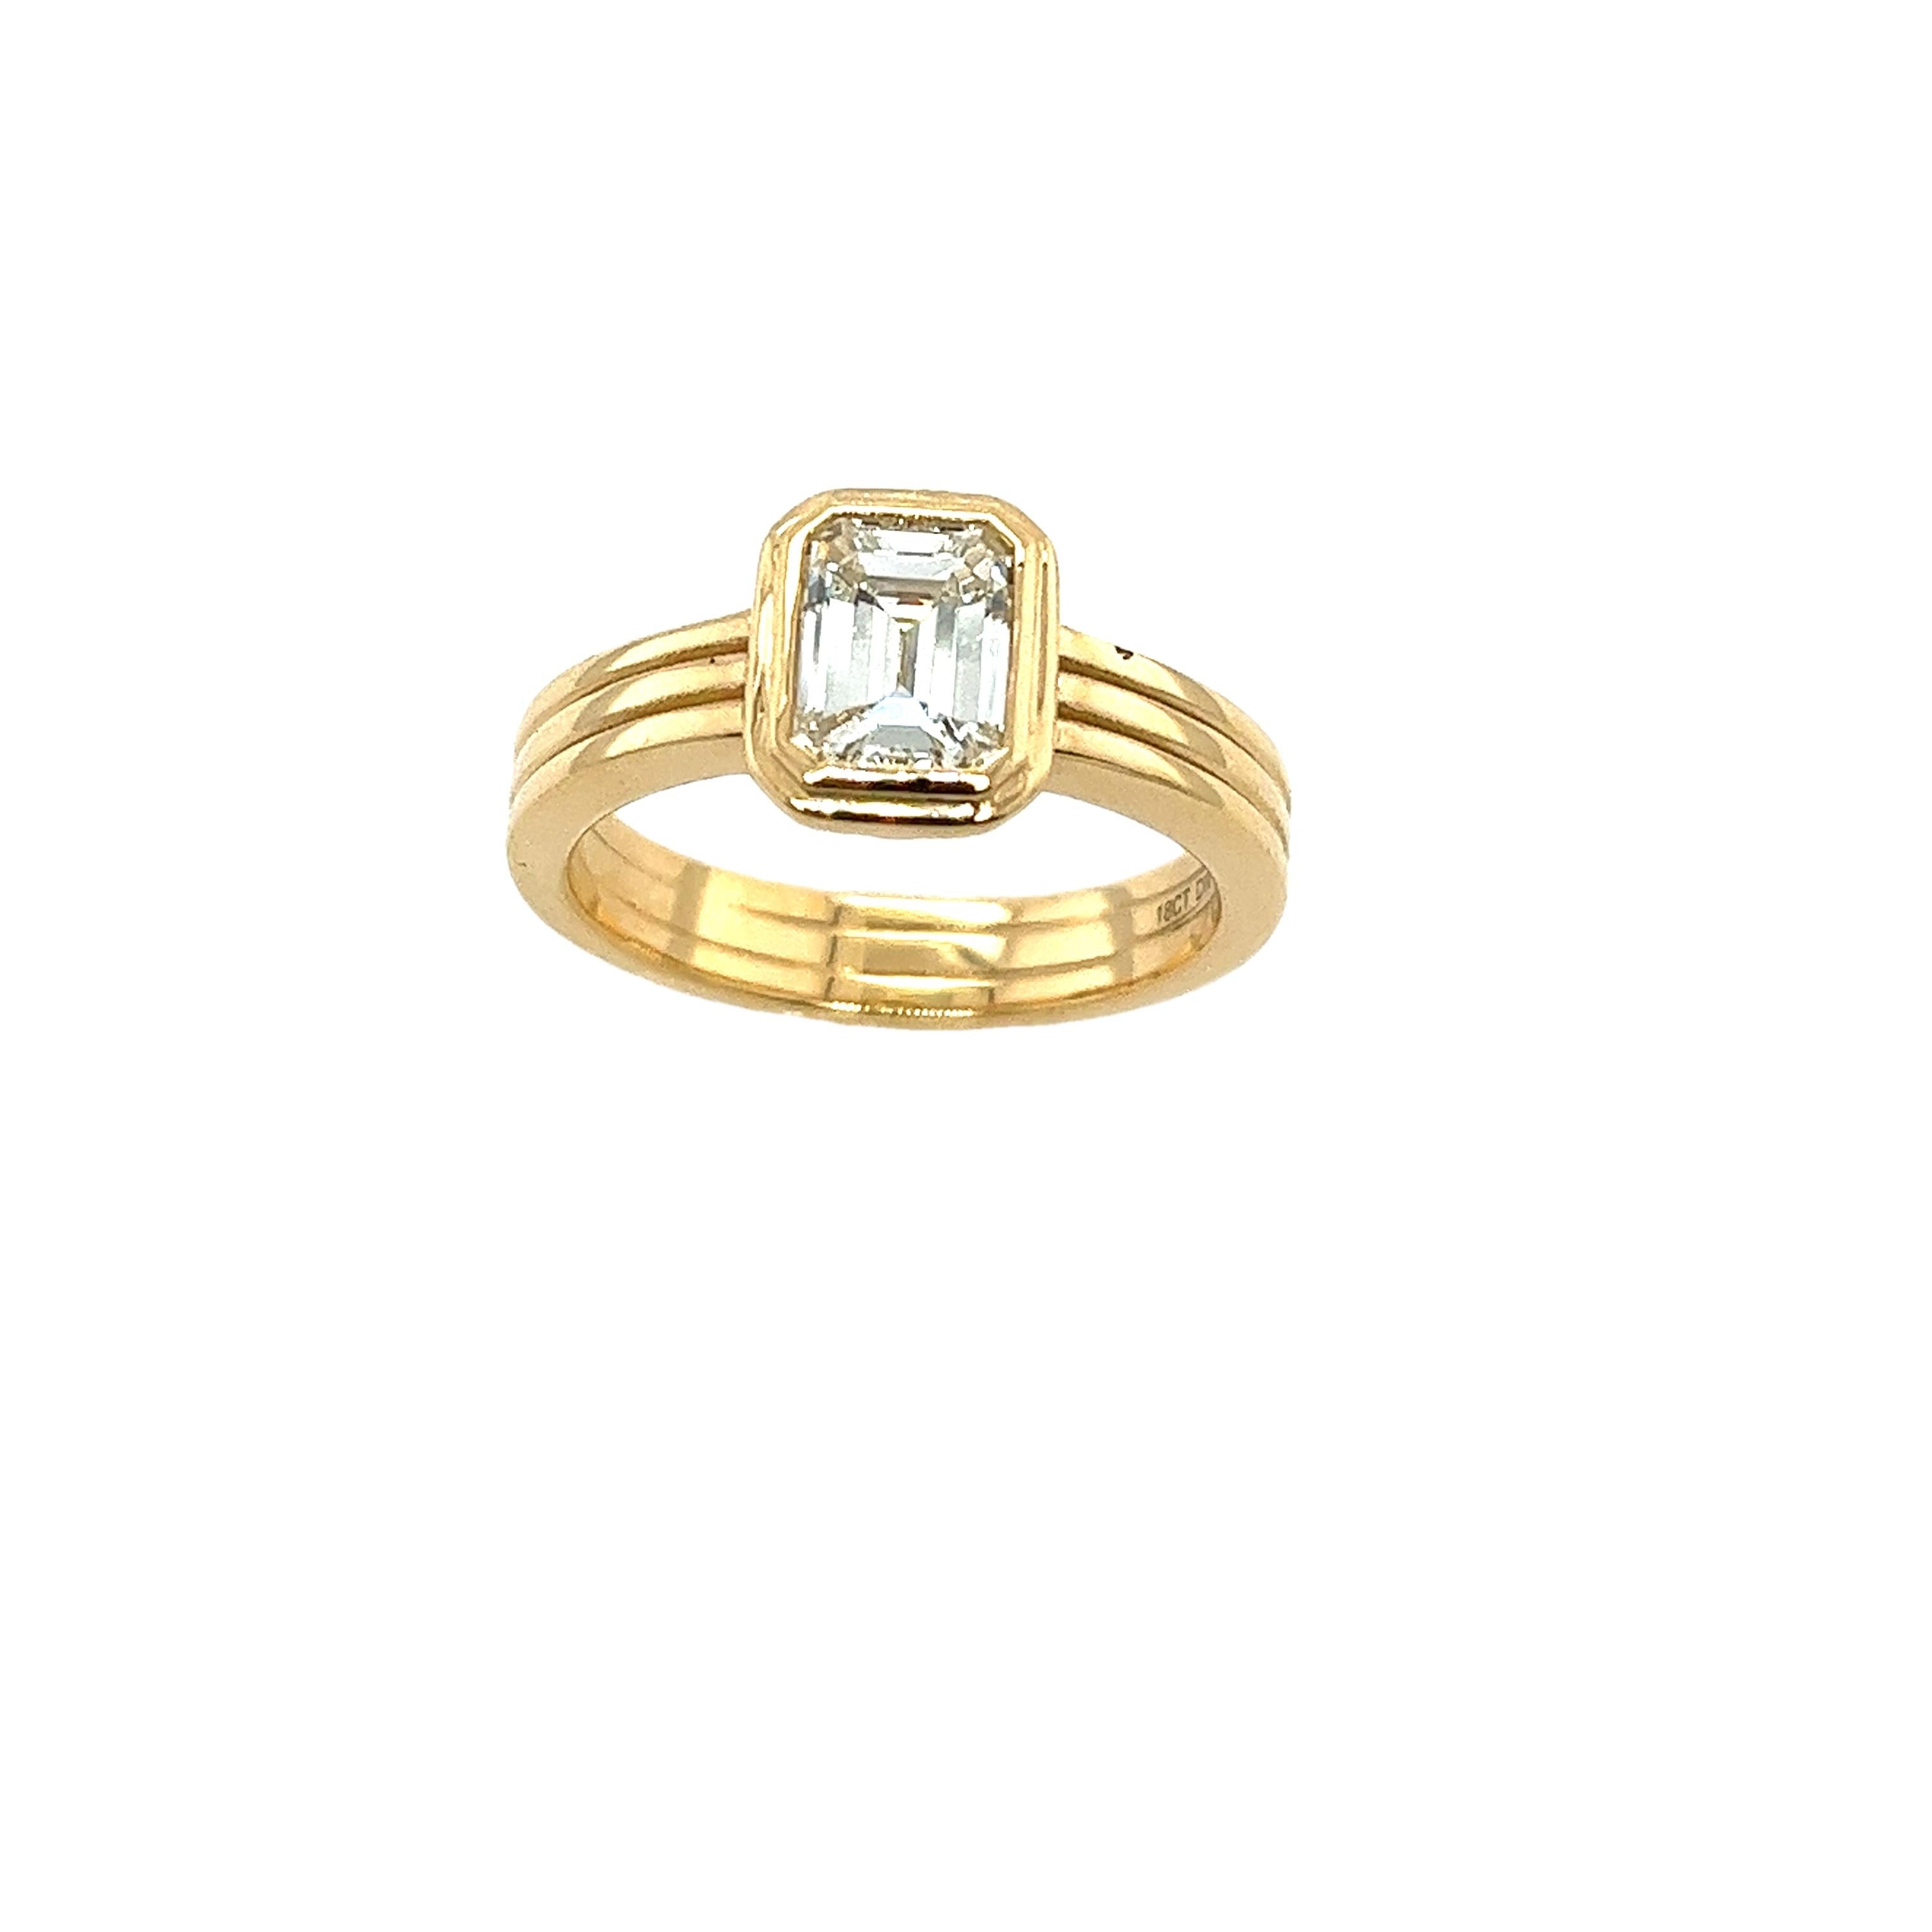 This gorgeous solitaire diamond ring set with 
1.01ct K/VS2 natural emerald cut diamond 
set in 18ct yellow gold 3 band setting 
can make a perfect engagement ring.
Total Diamond Weight: 1.01ct
Diamond Colour: K
Diamond Clarity: VS2
Width of Band: